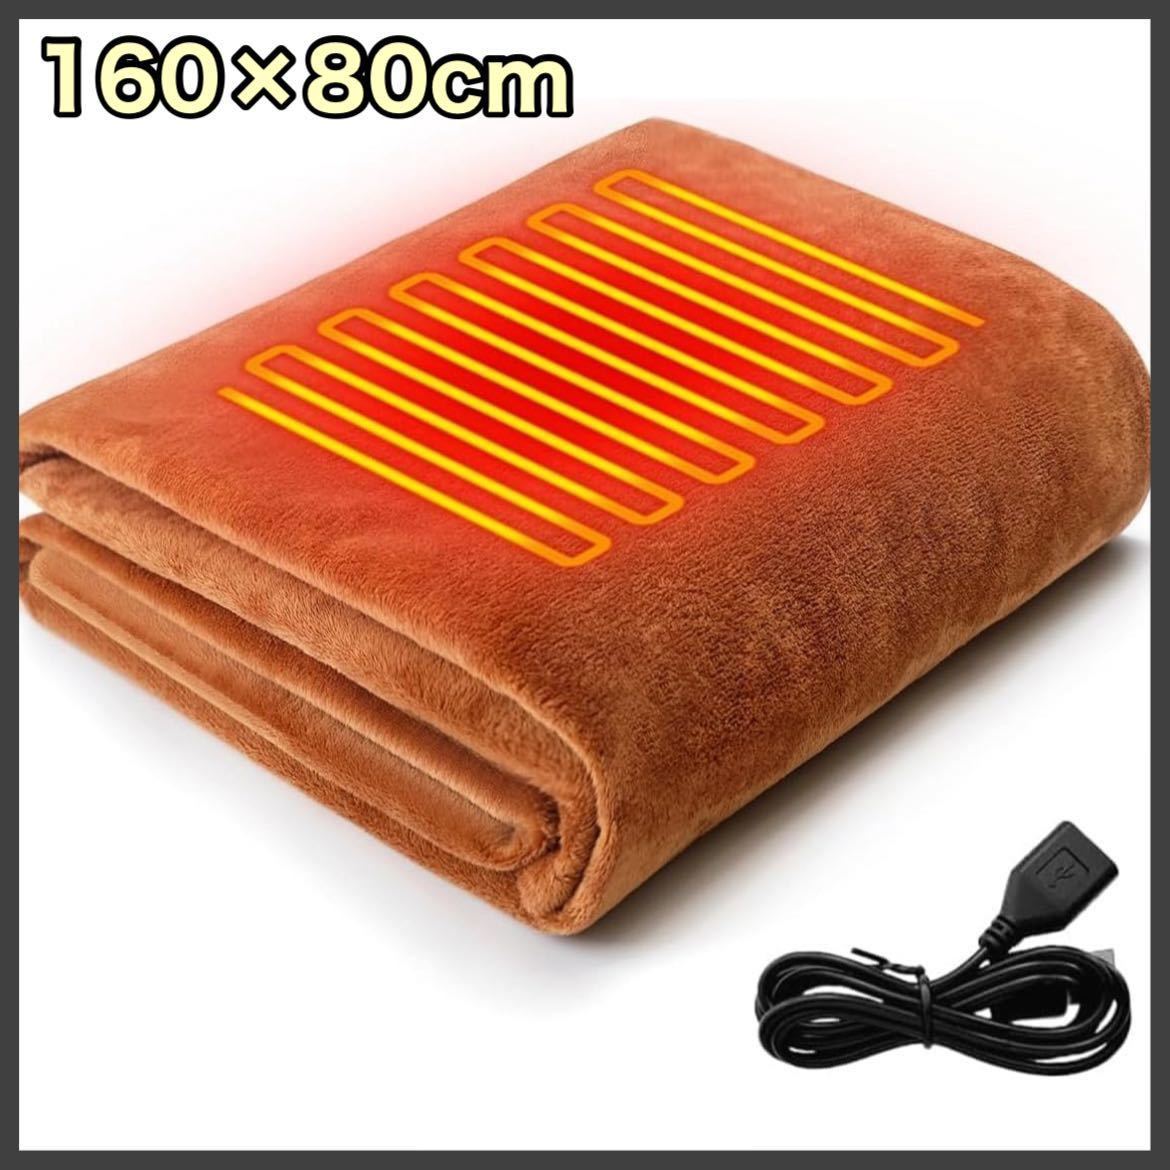  electric lap blanket blanket 160×80cm protection against cold measures USB laundry possible outdoor camp 